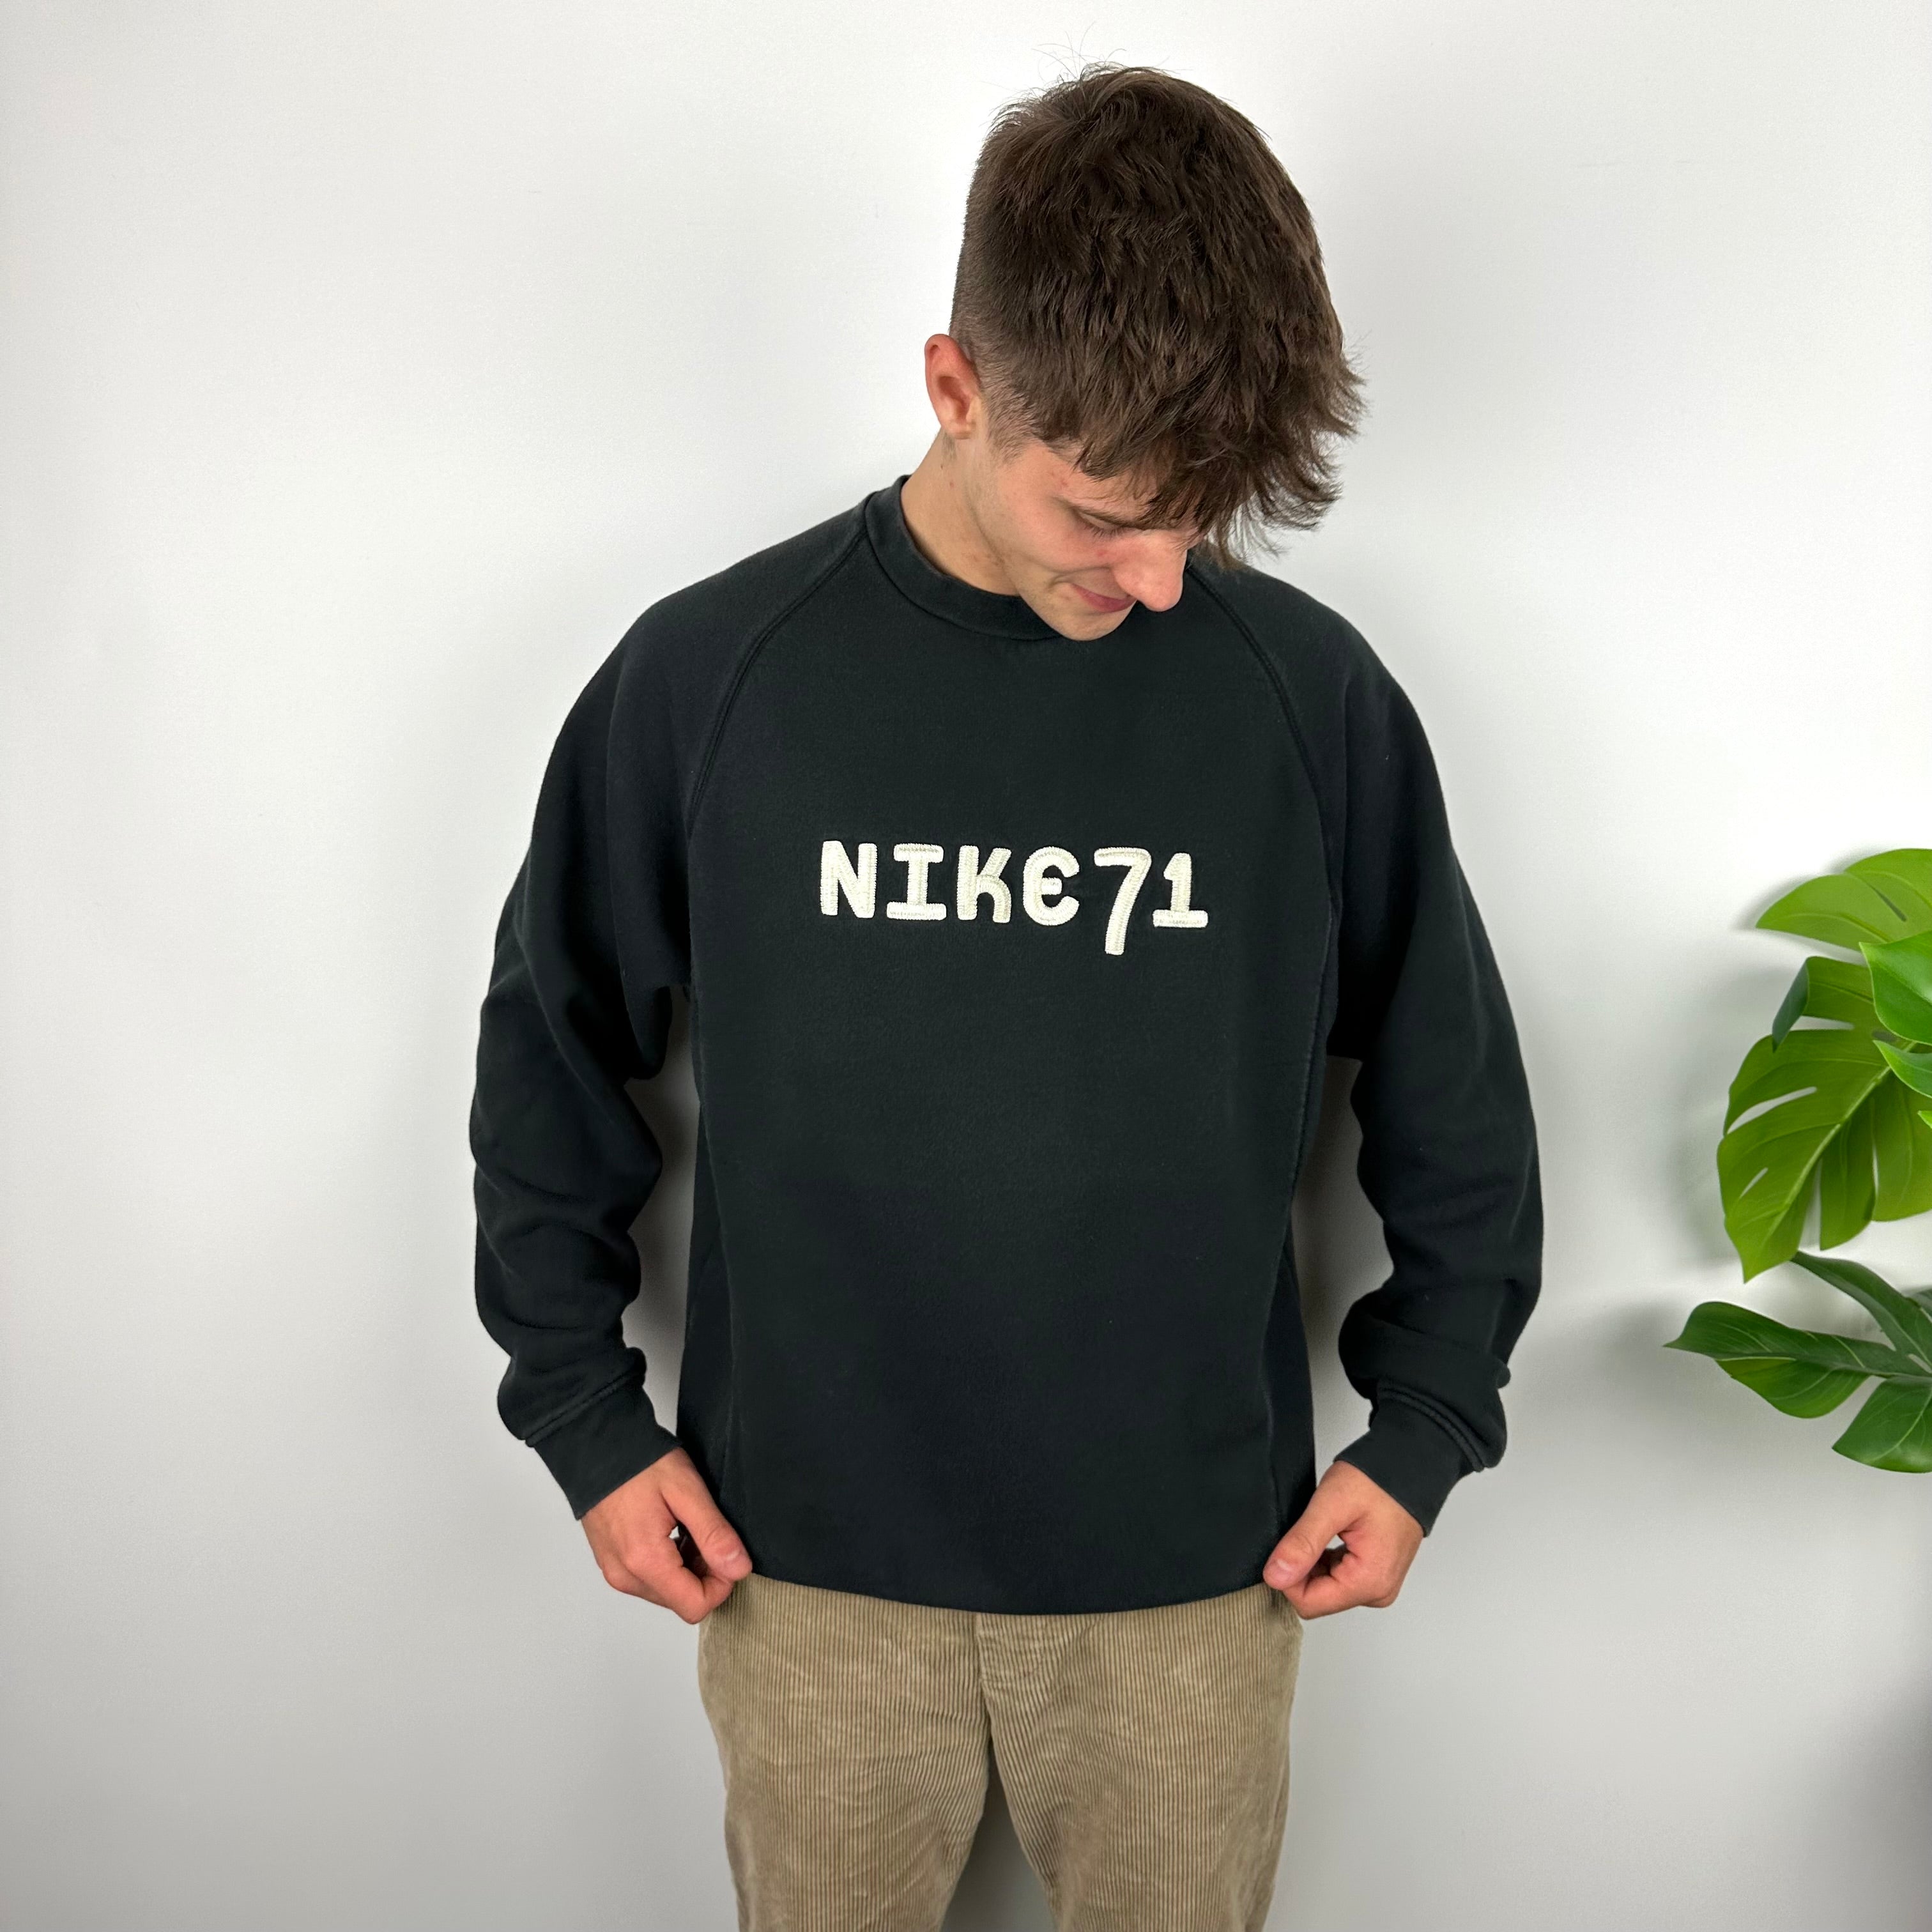 Nike Black Embroidered Spell Out Sweatshirt (L)